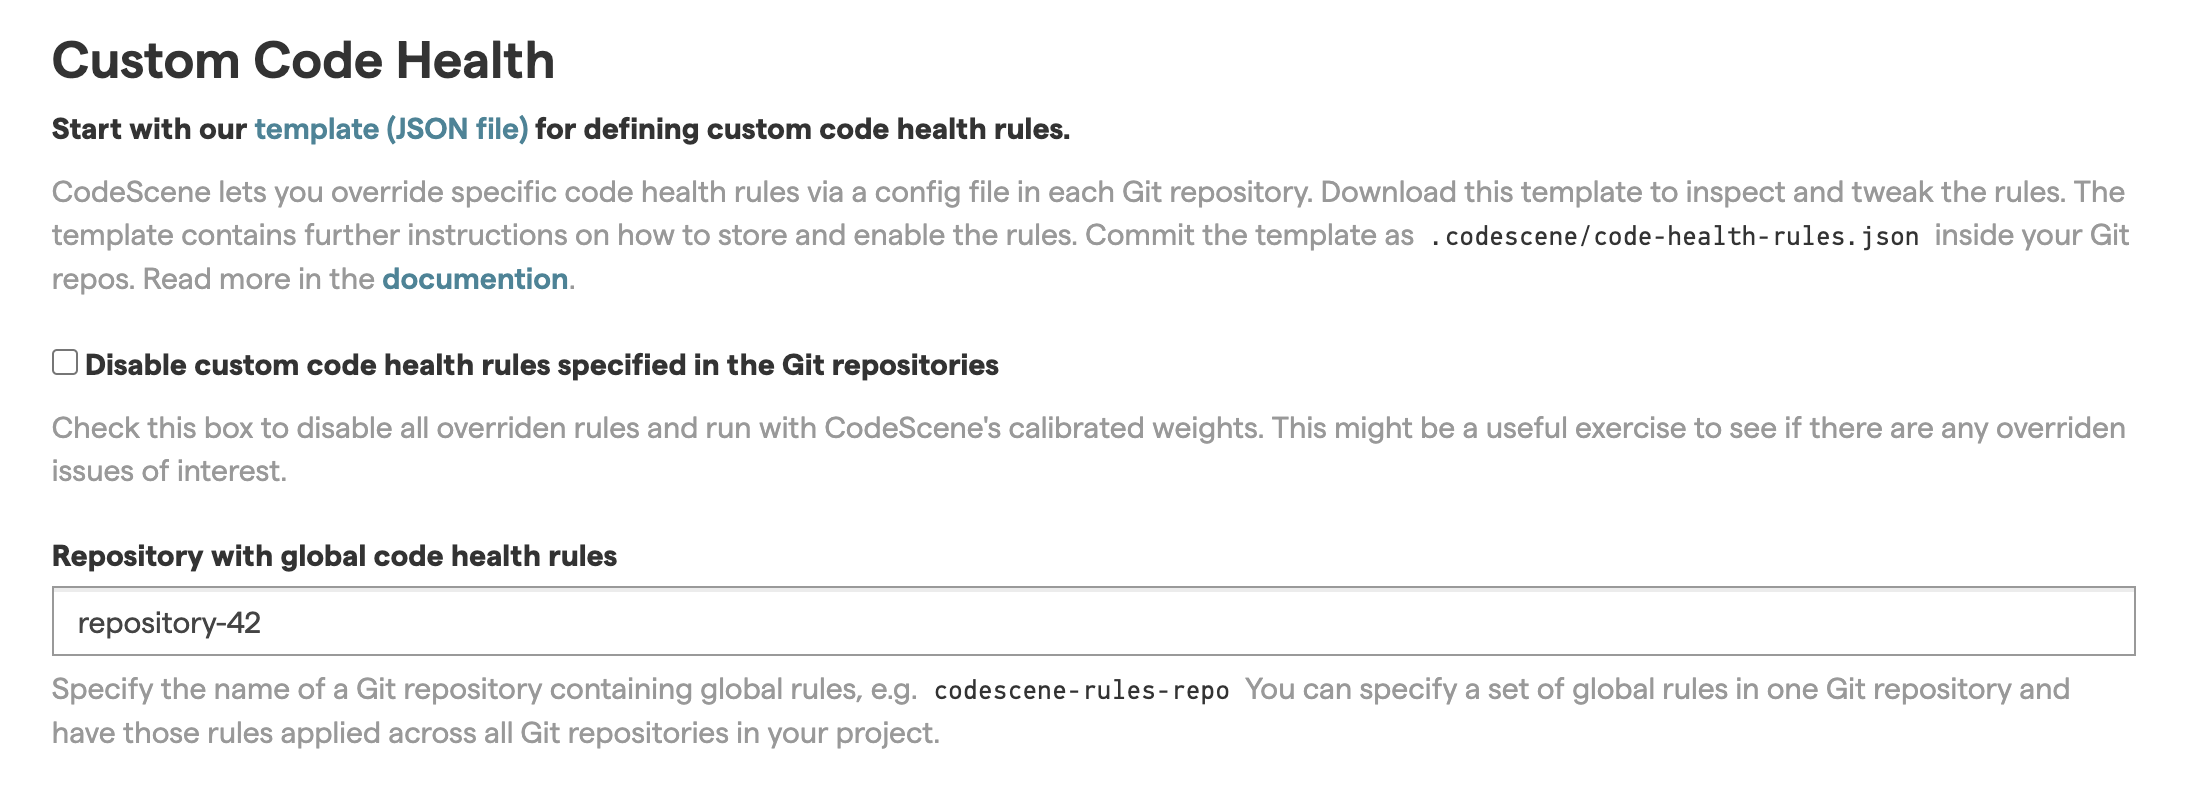 Use the 'Repository with global code health rules' field in the Hotspots tab. Enter the repository name of the repository containing the rules.